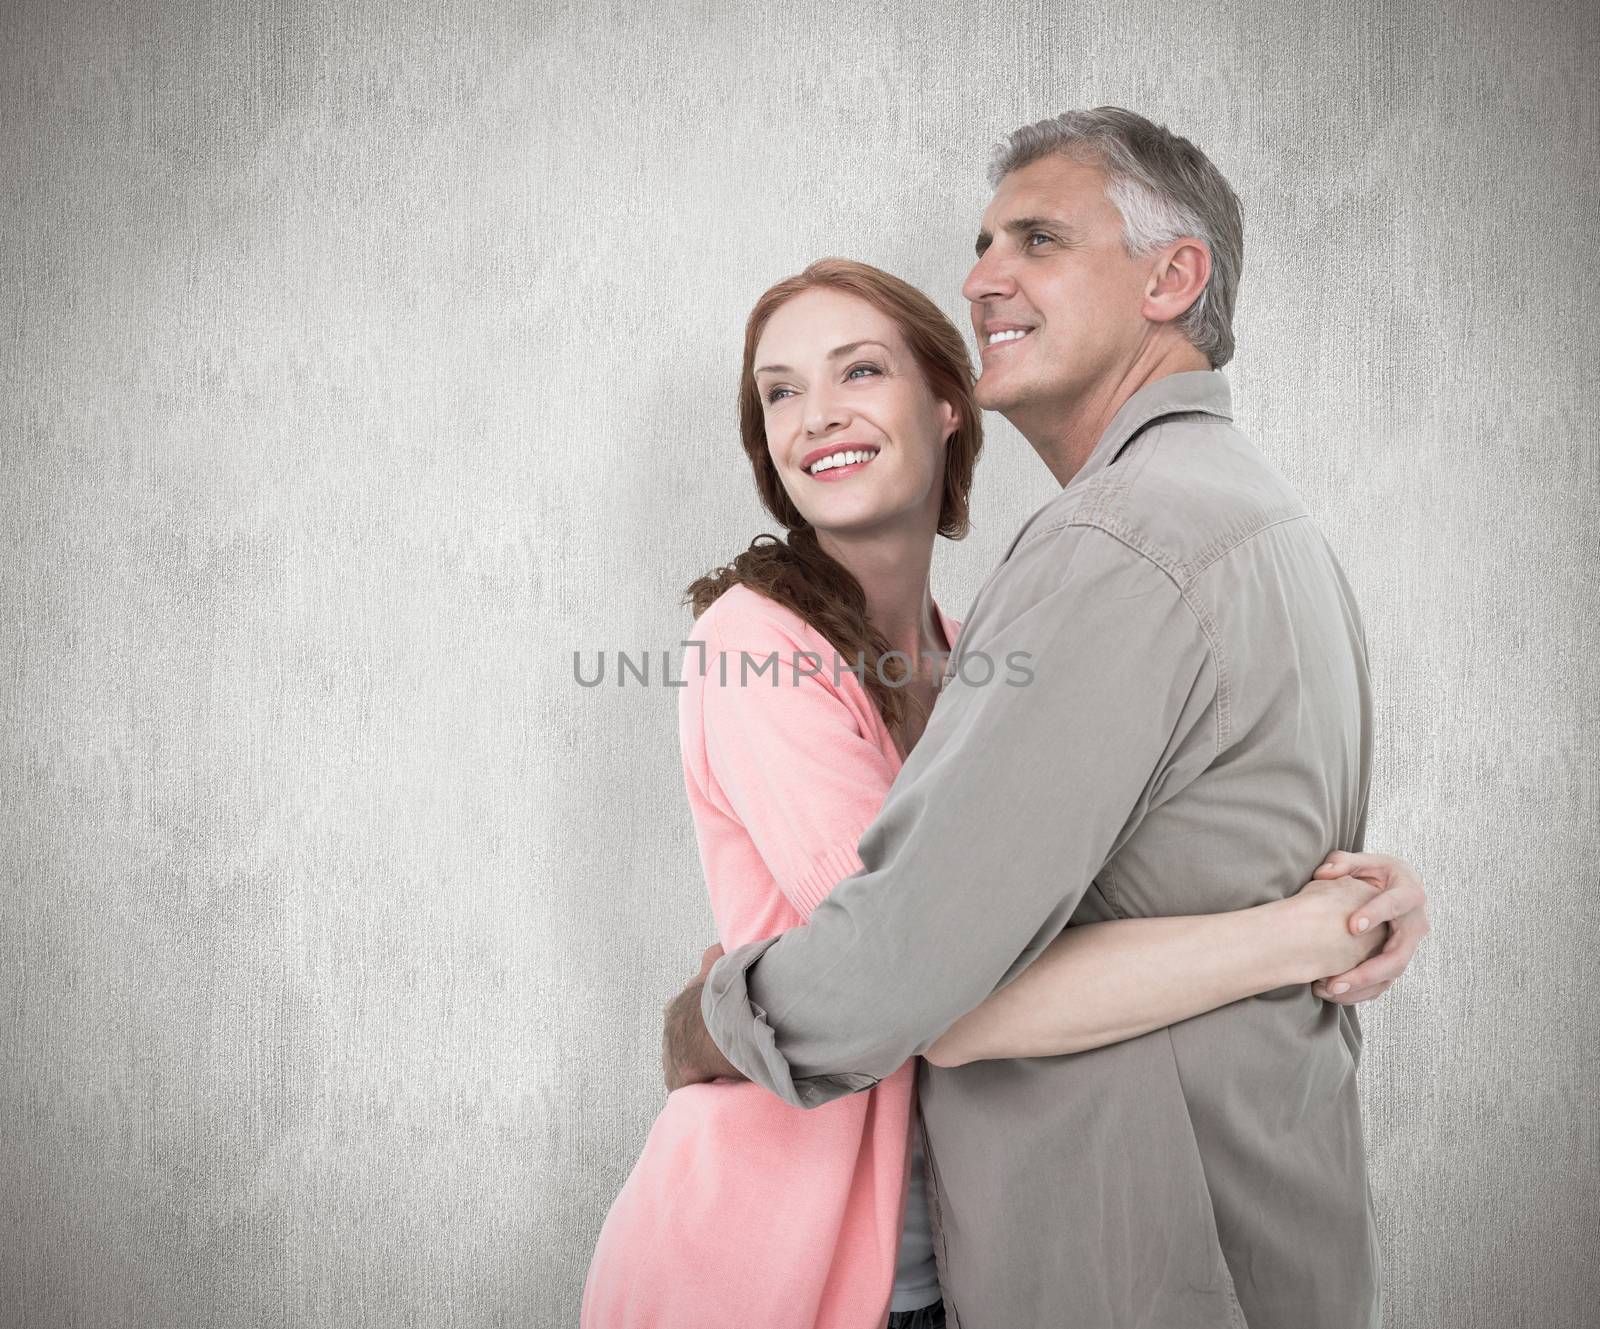 Casual couple hugging and smiling against white background